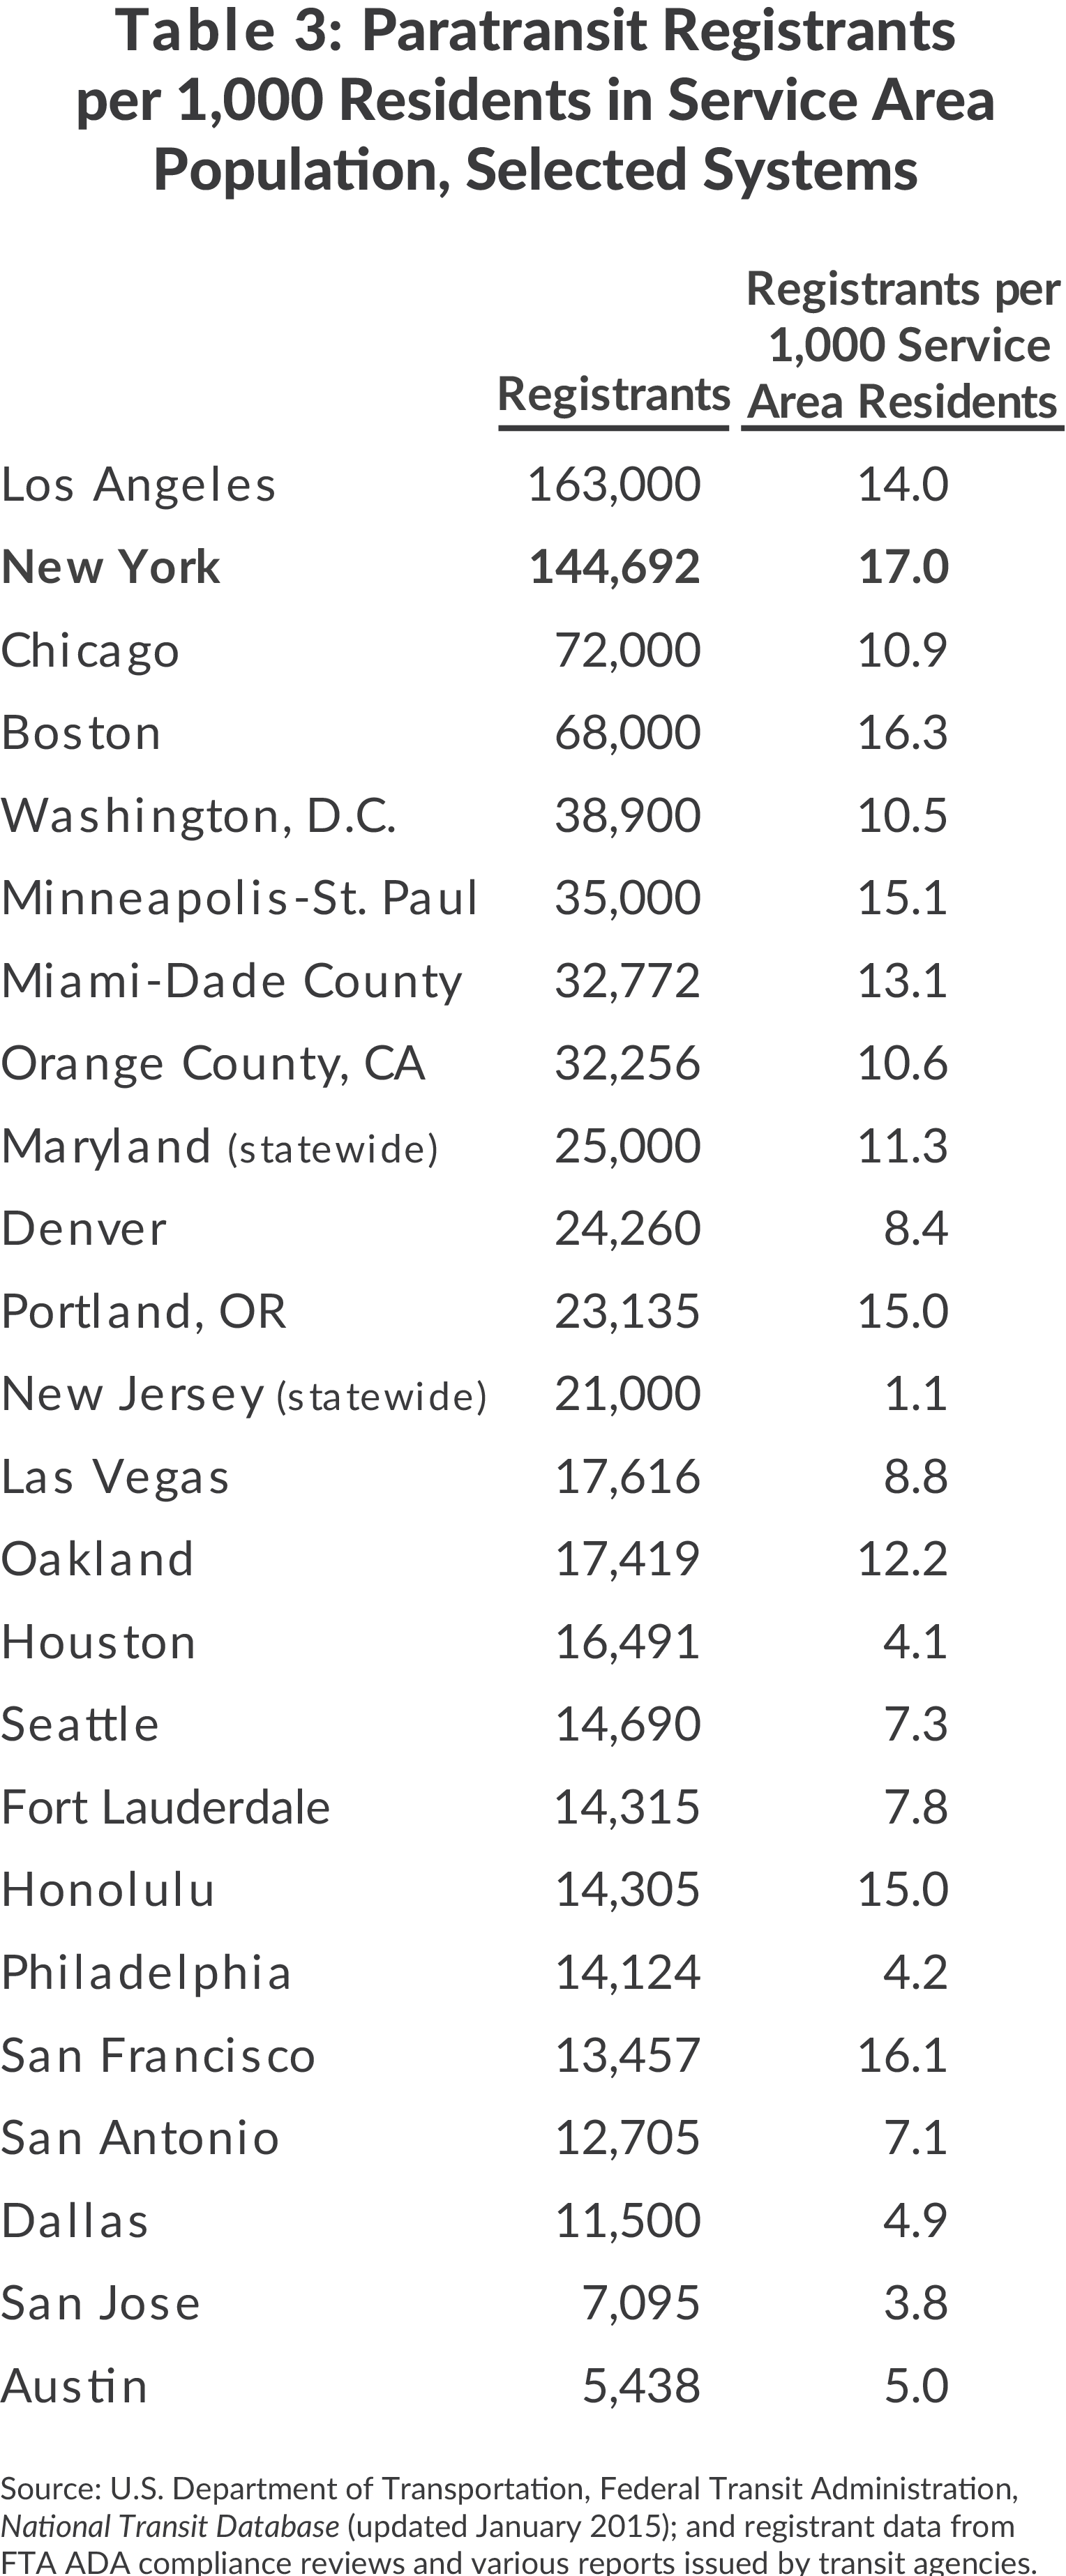 Paratransit Registrations per 1,000 residents in NYC and large cities